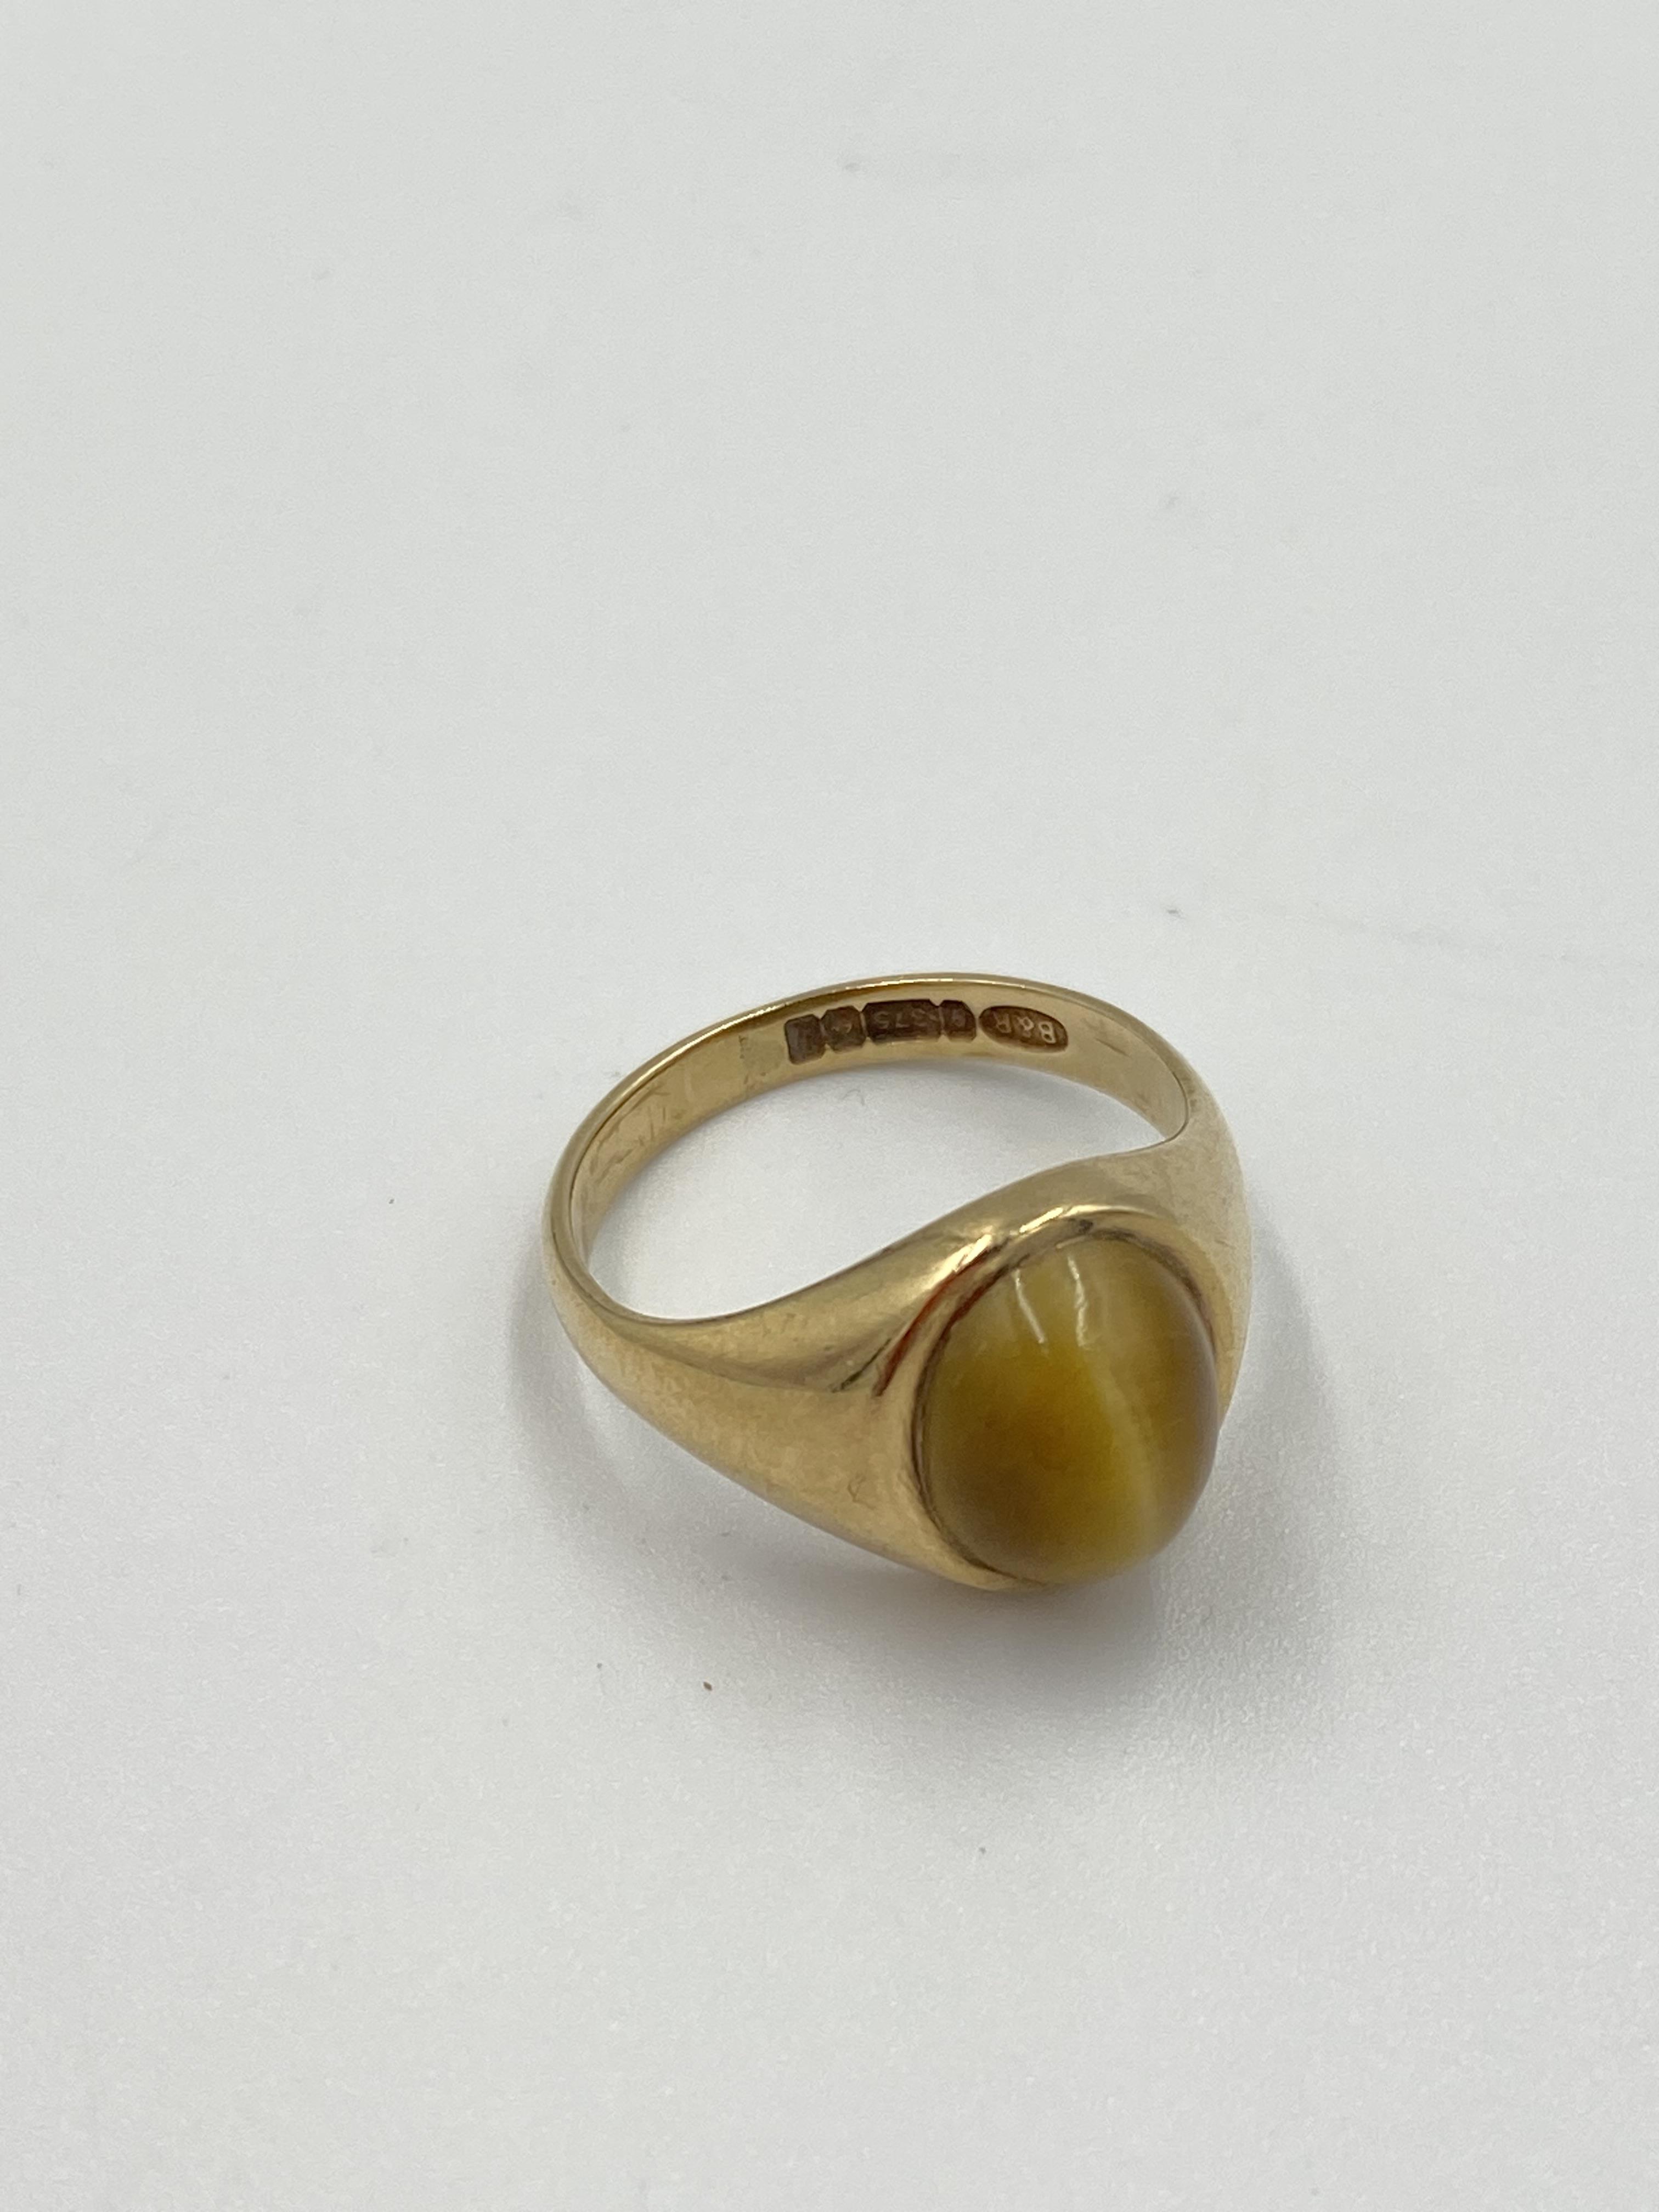 9ct gold and agate ring - Image 4 of 4